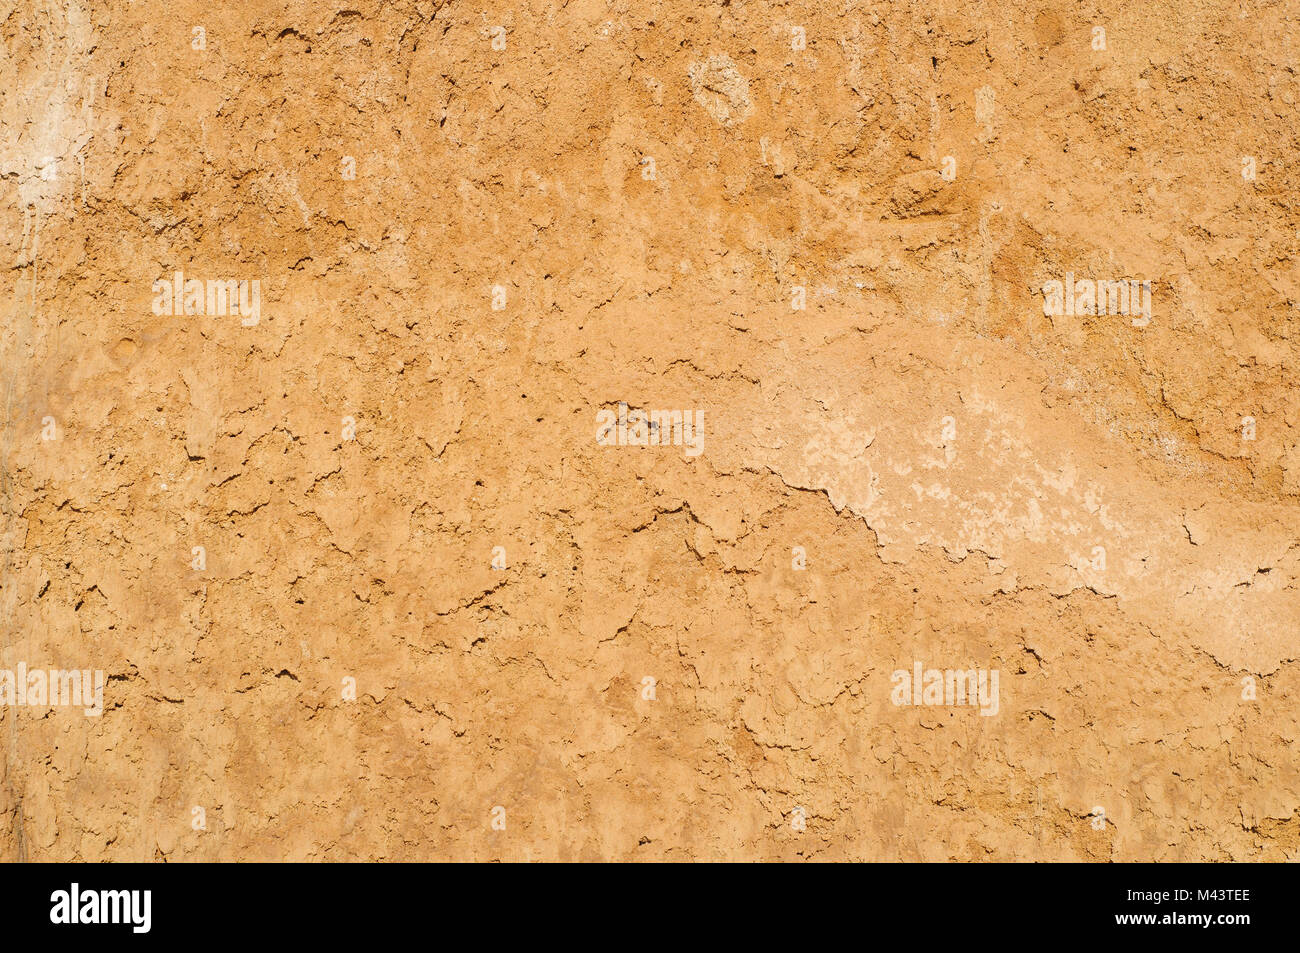 Clay soil texture background, dried surface Stock Photo